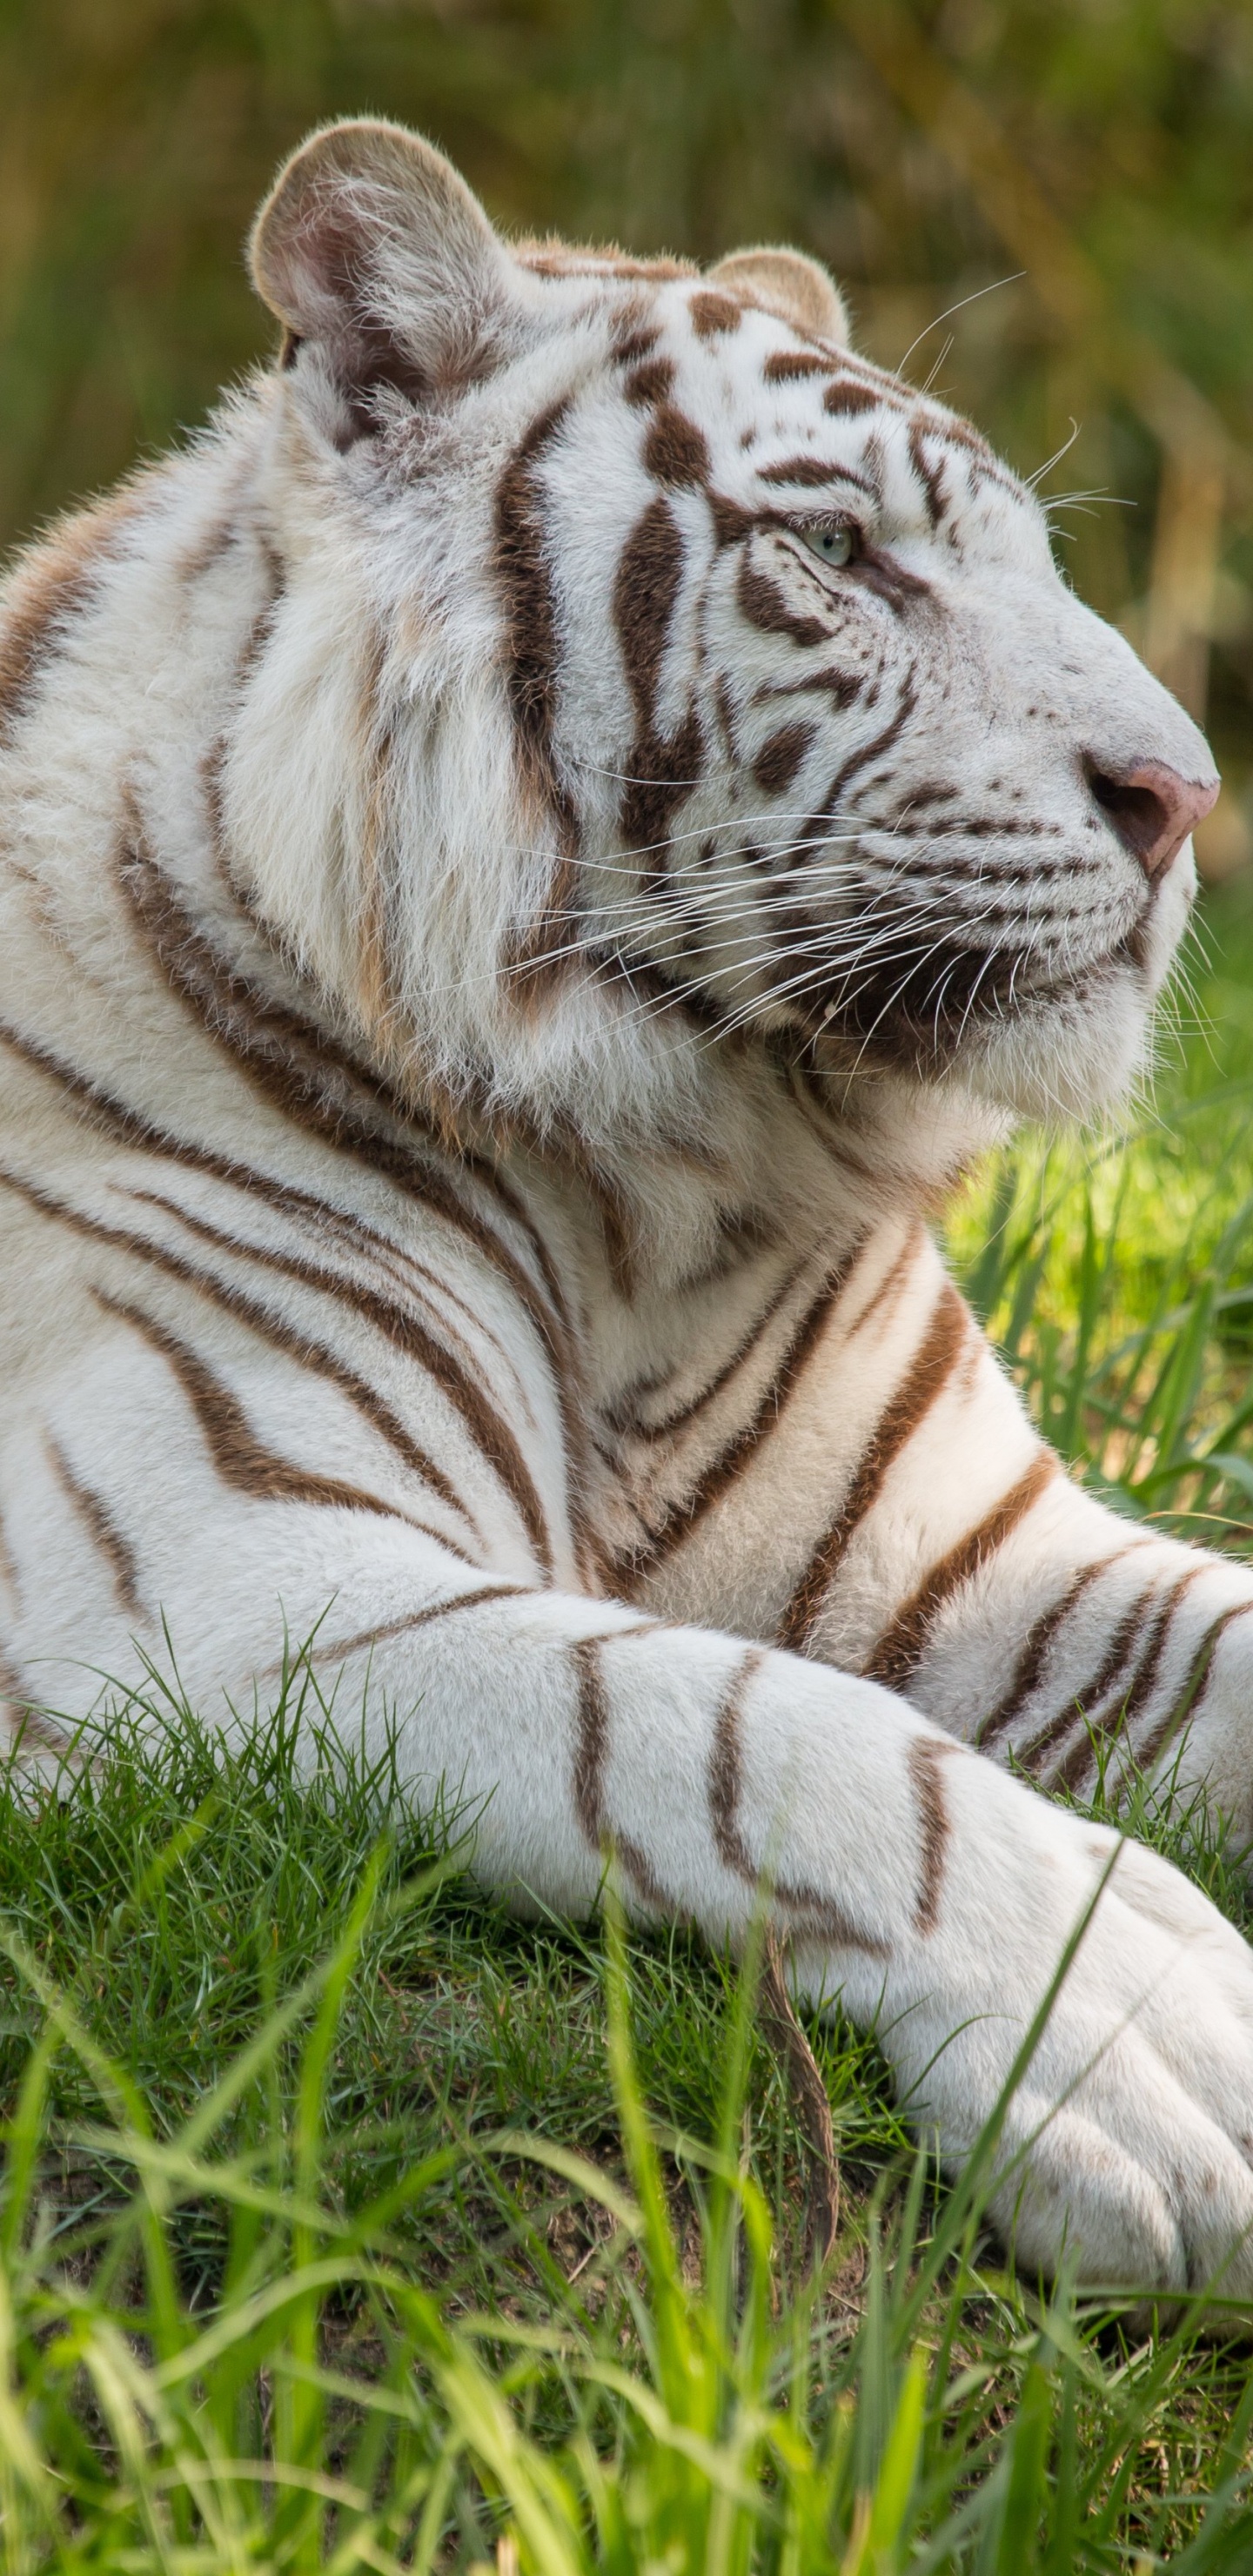 White and Black Tiger Lying on Green Grass During Daytime. Wallpaper in 1440x2960 Resolution